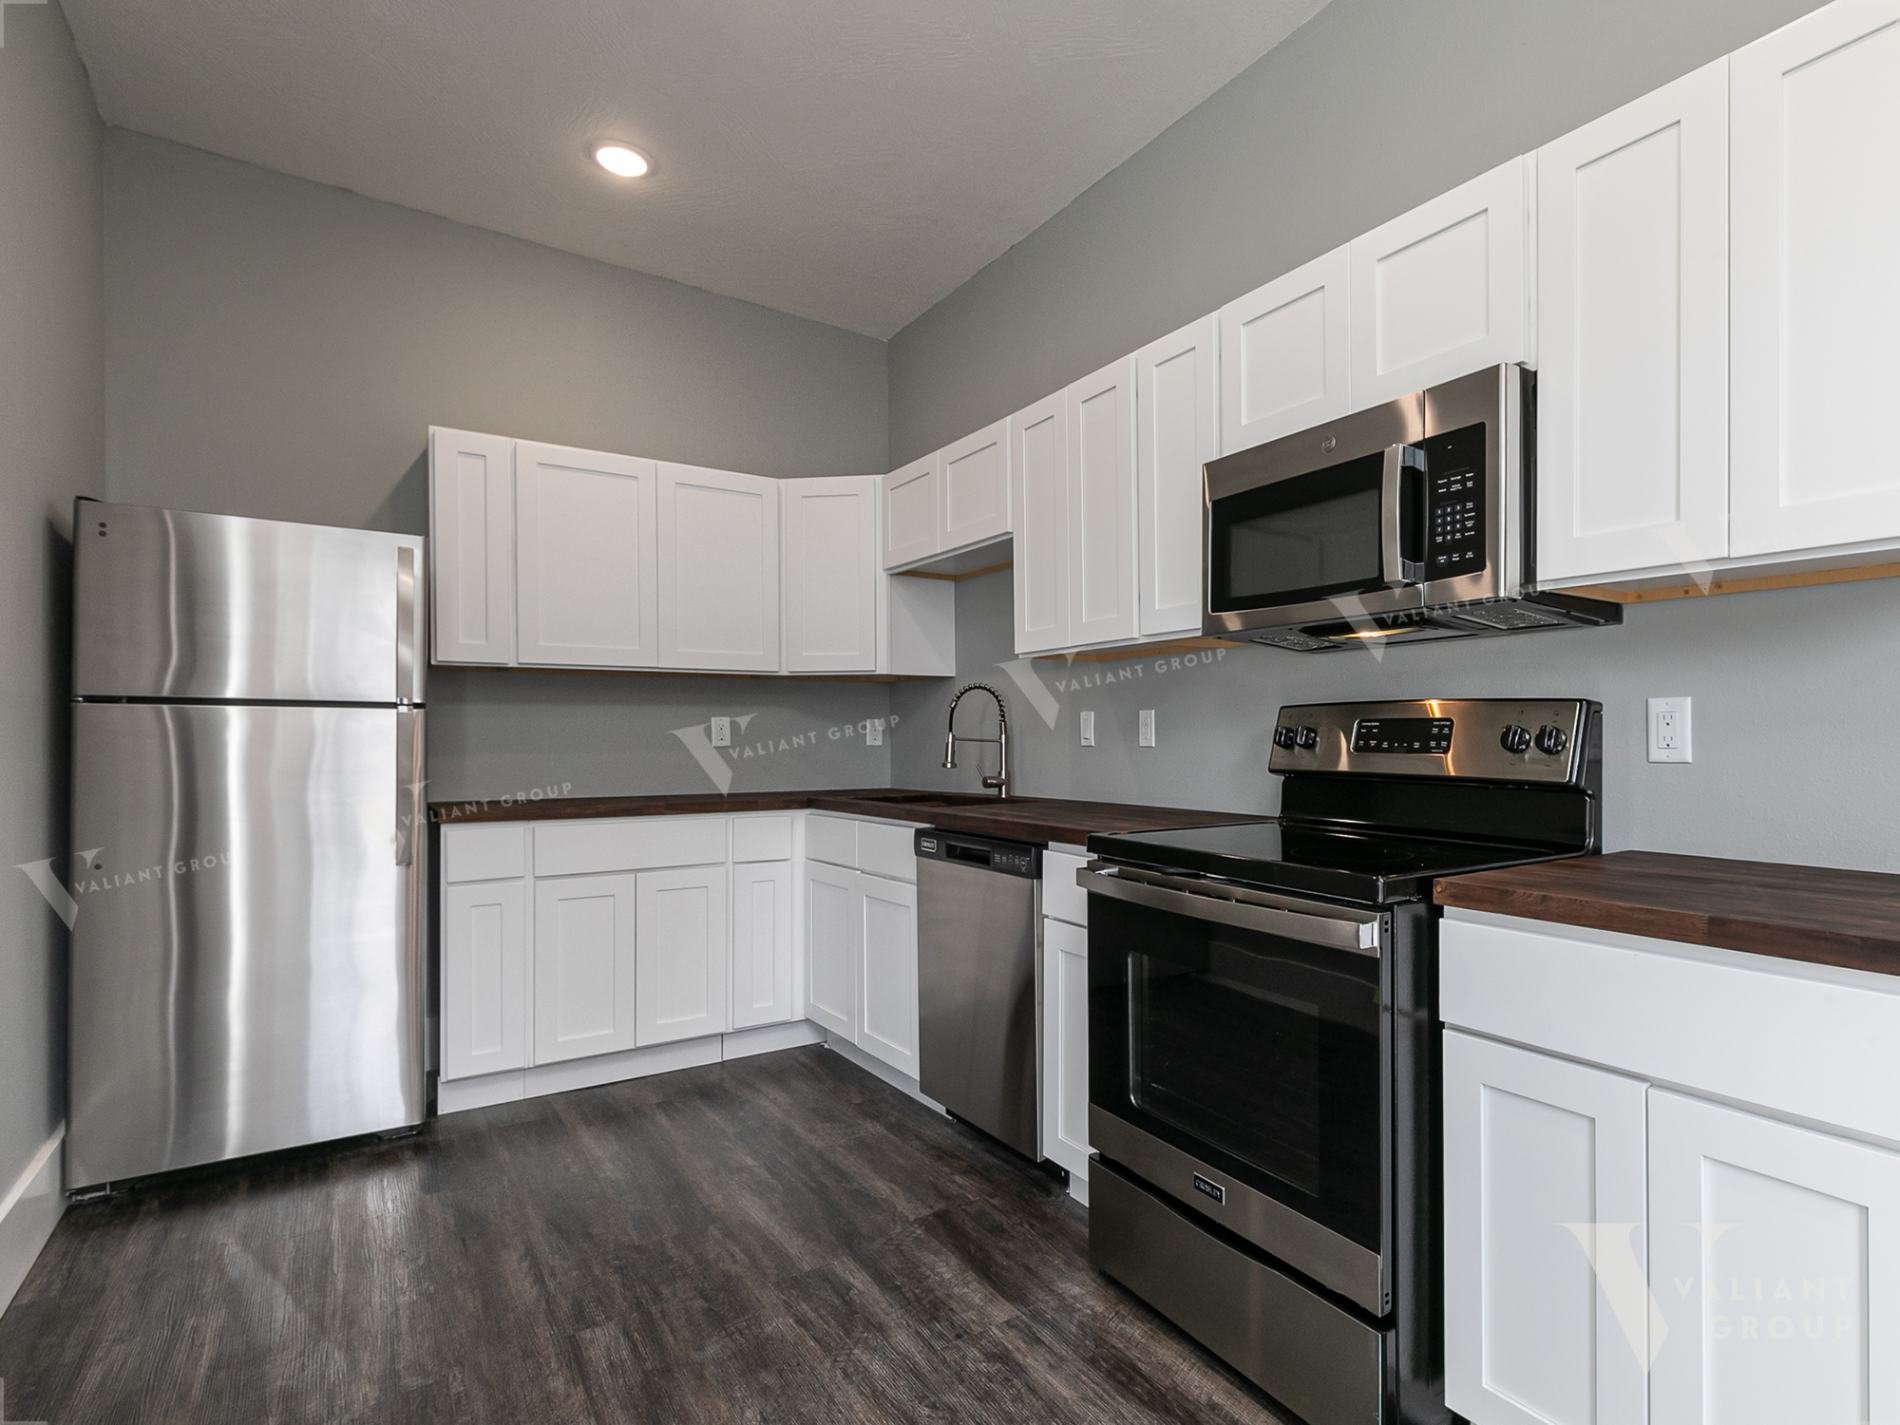 806-South-Ave-Apt-03-Springfield-MO-04-Kitchen-Cabinets.jpg